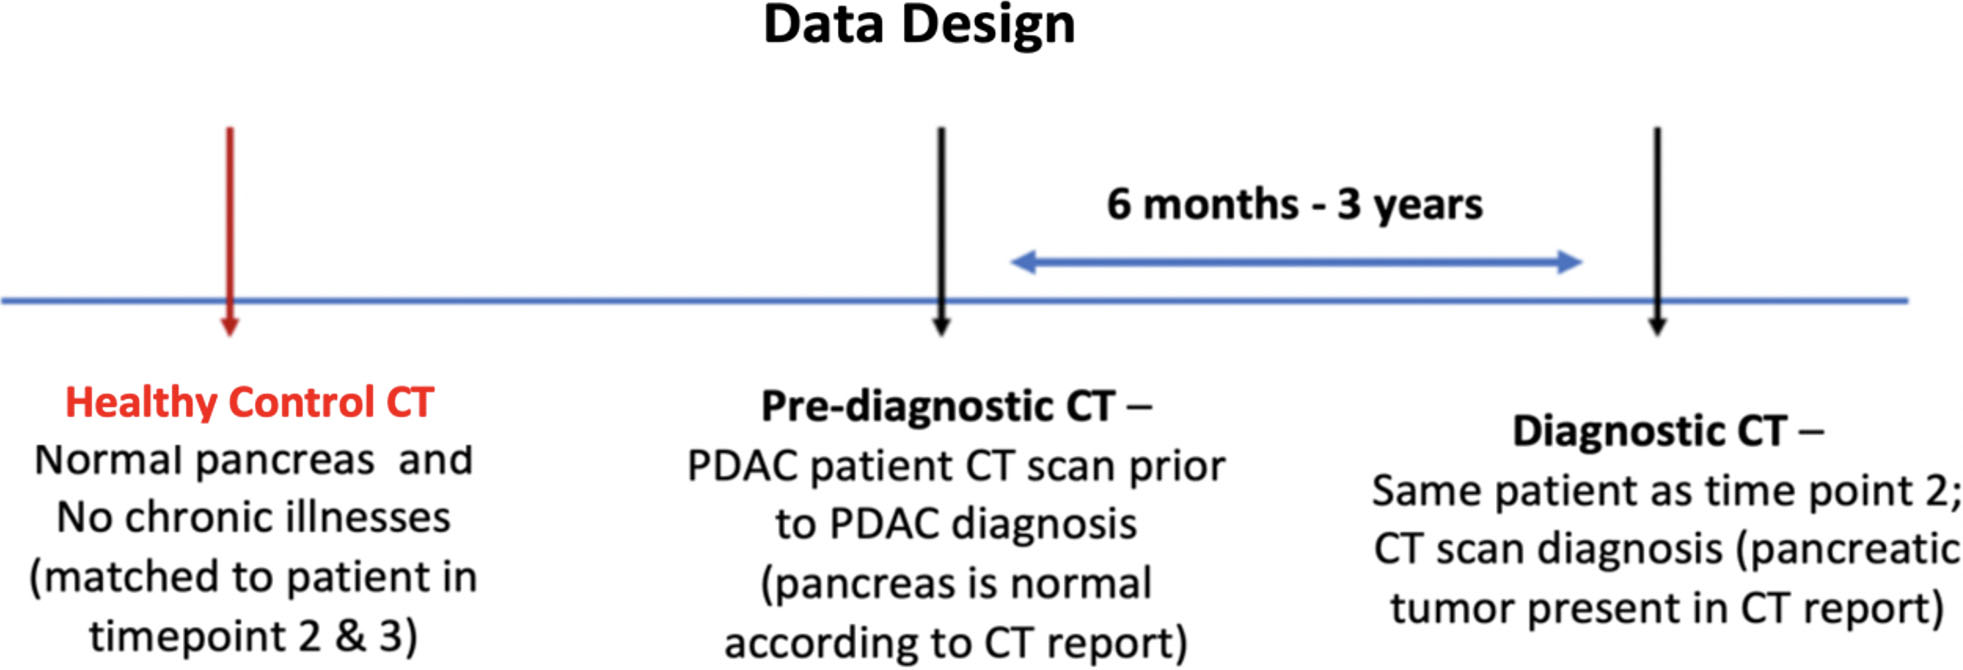 Proposed design of the data for the study. Each case in the dataset consists of three types of abdominal CT scans: Healthy control, Pre-diagnostic, and Diagnostic. The Pre-diagnostic and Diagnostic scans were obtained from the same patient.